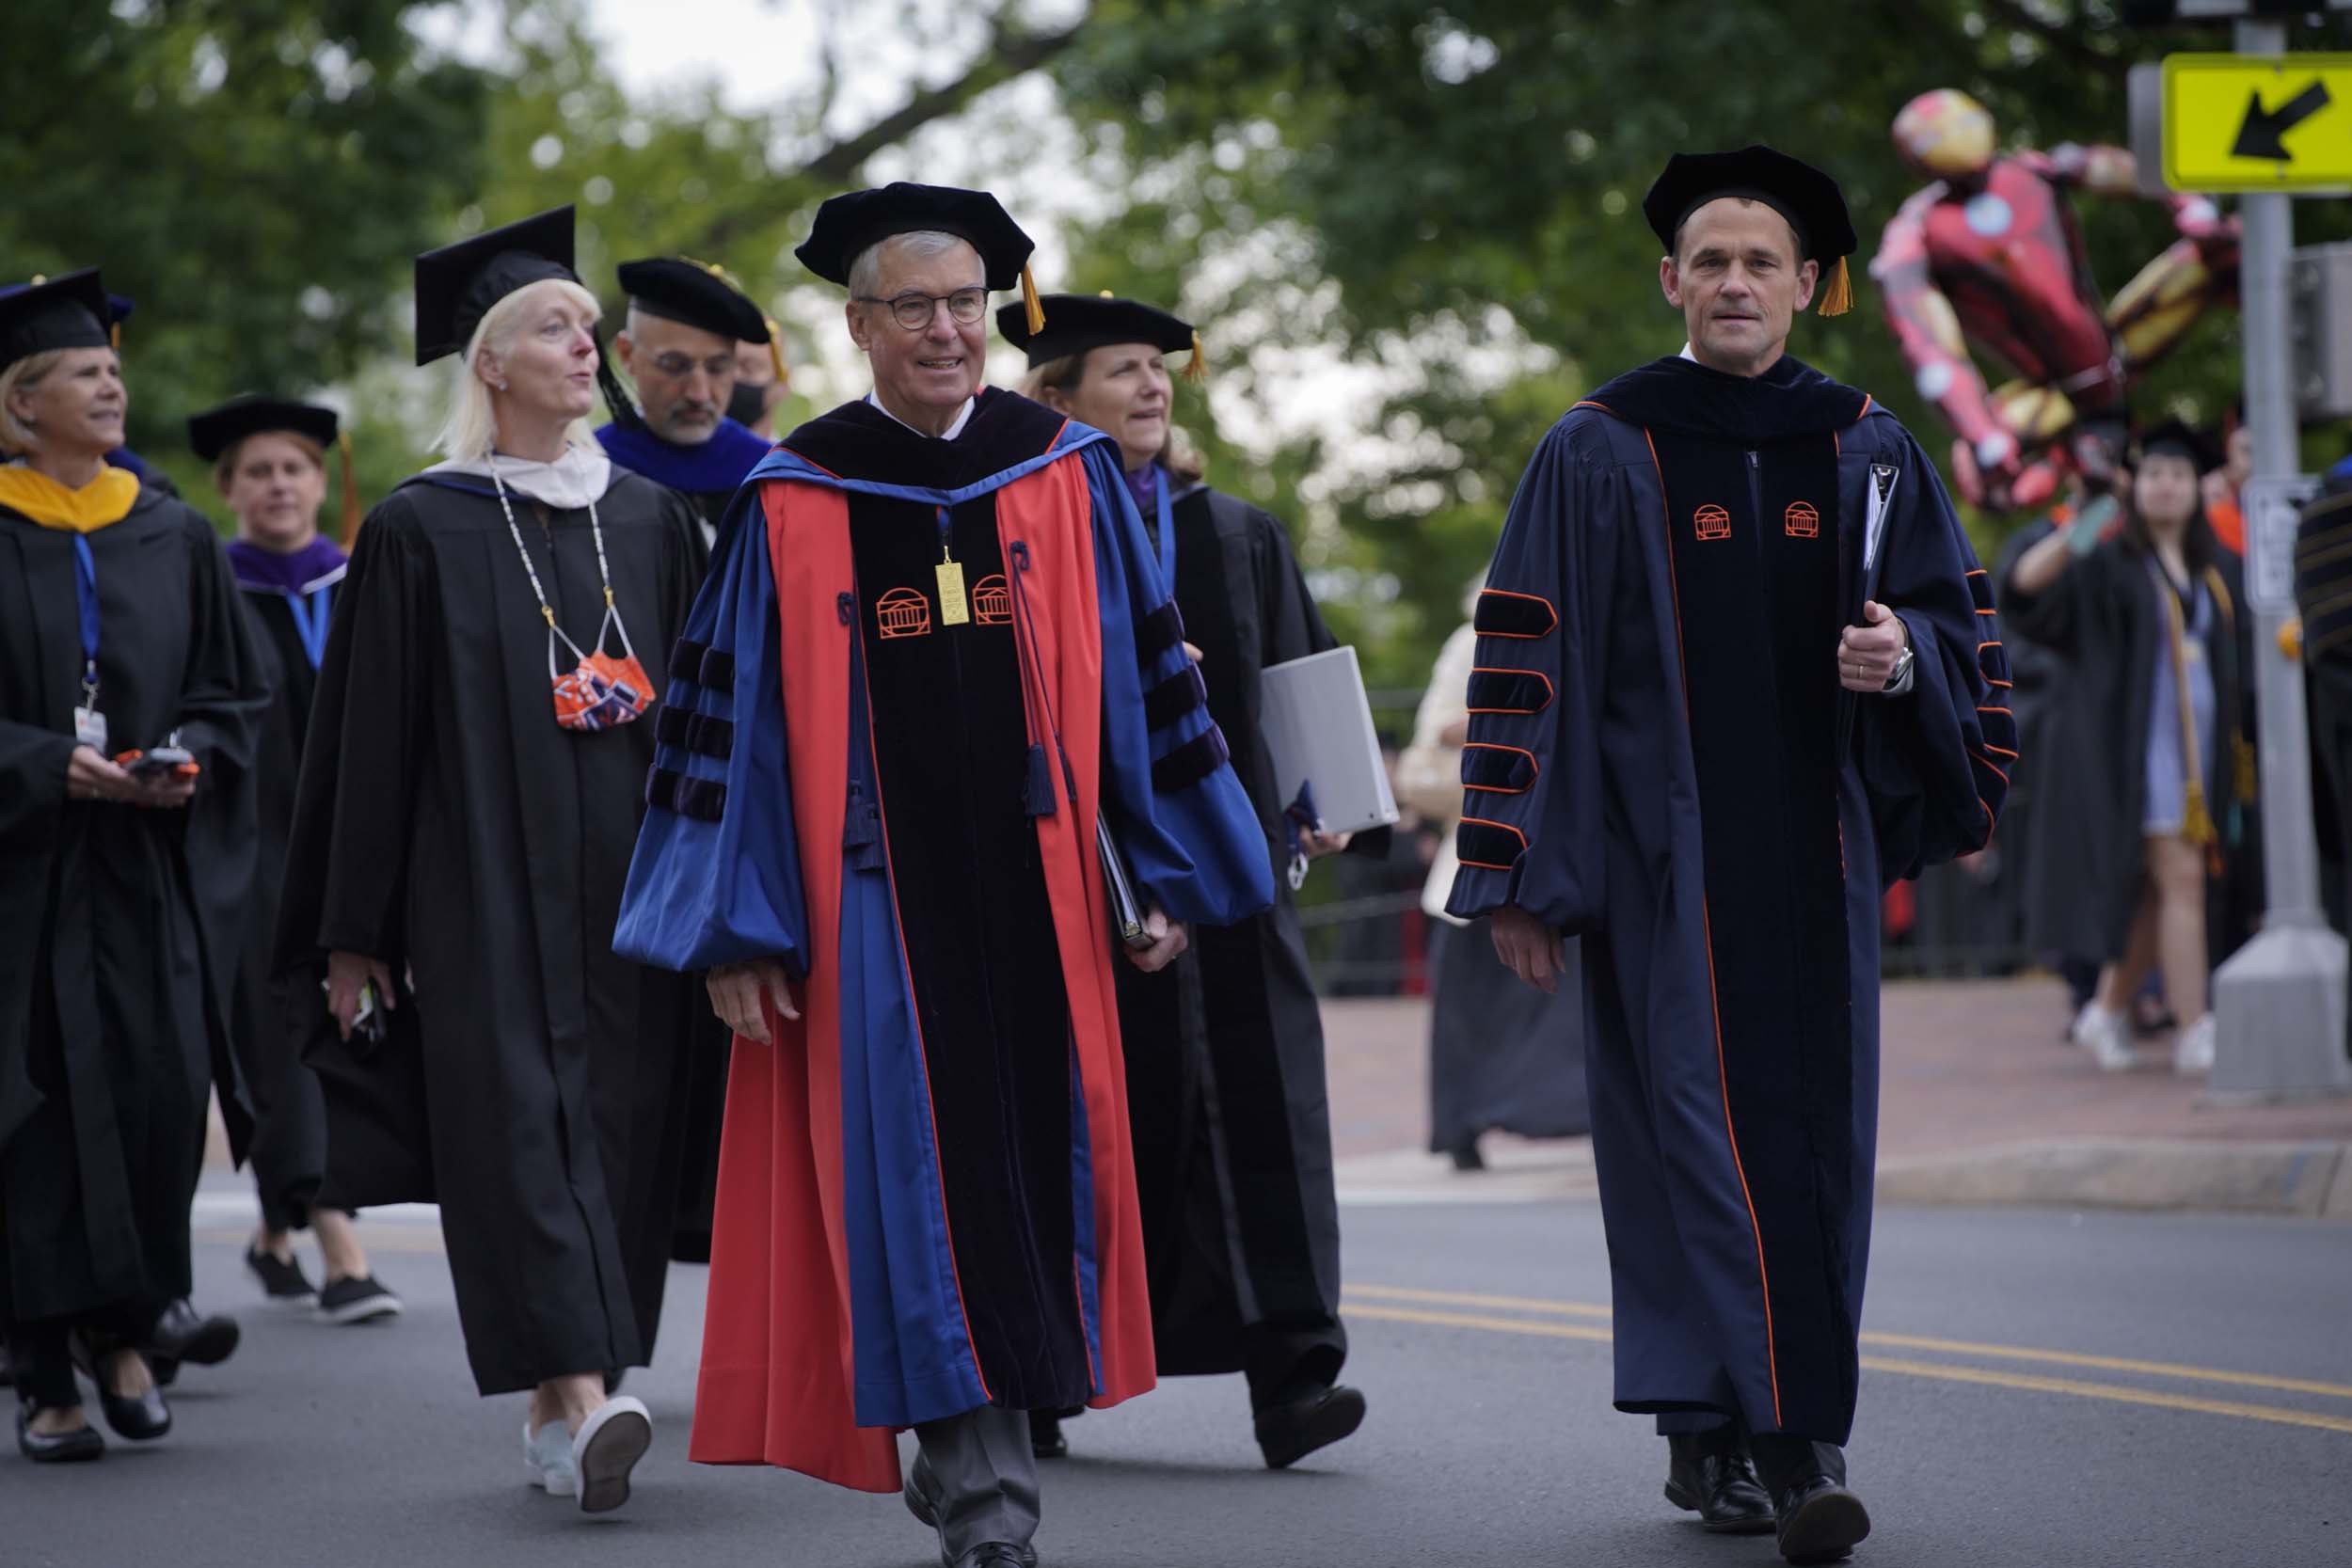 President Jim Ryan and other UVA Leadership walking in their Graduation robes down a road in Grounds